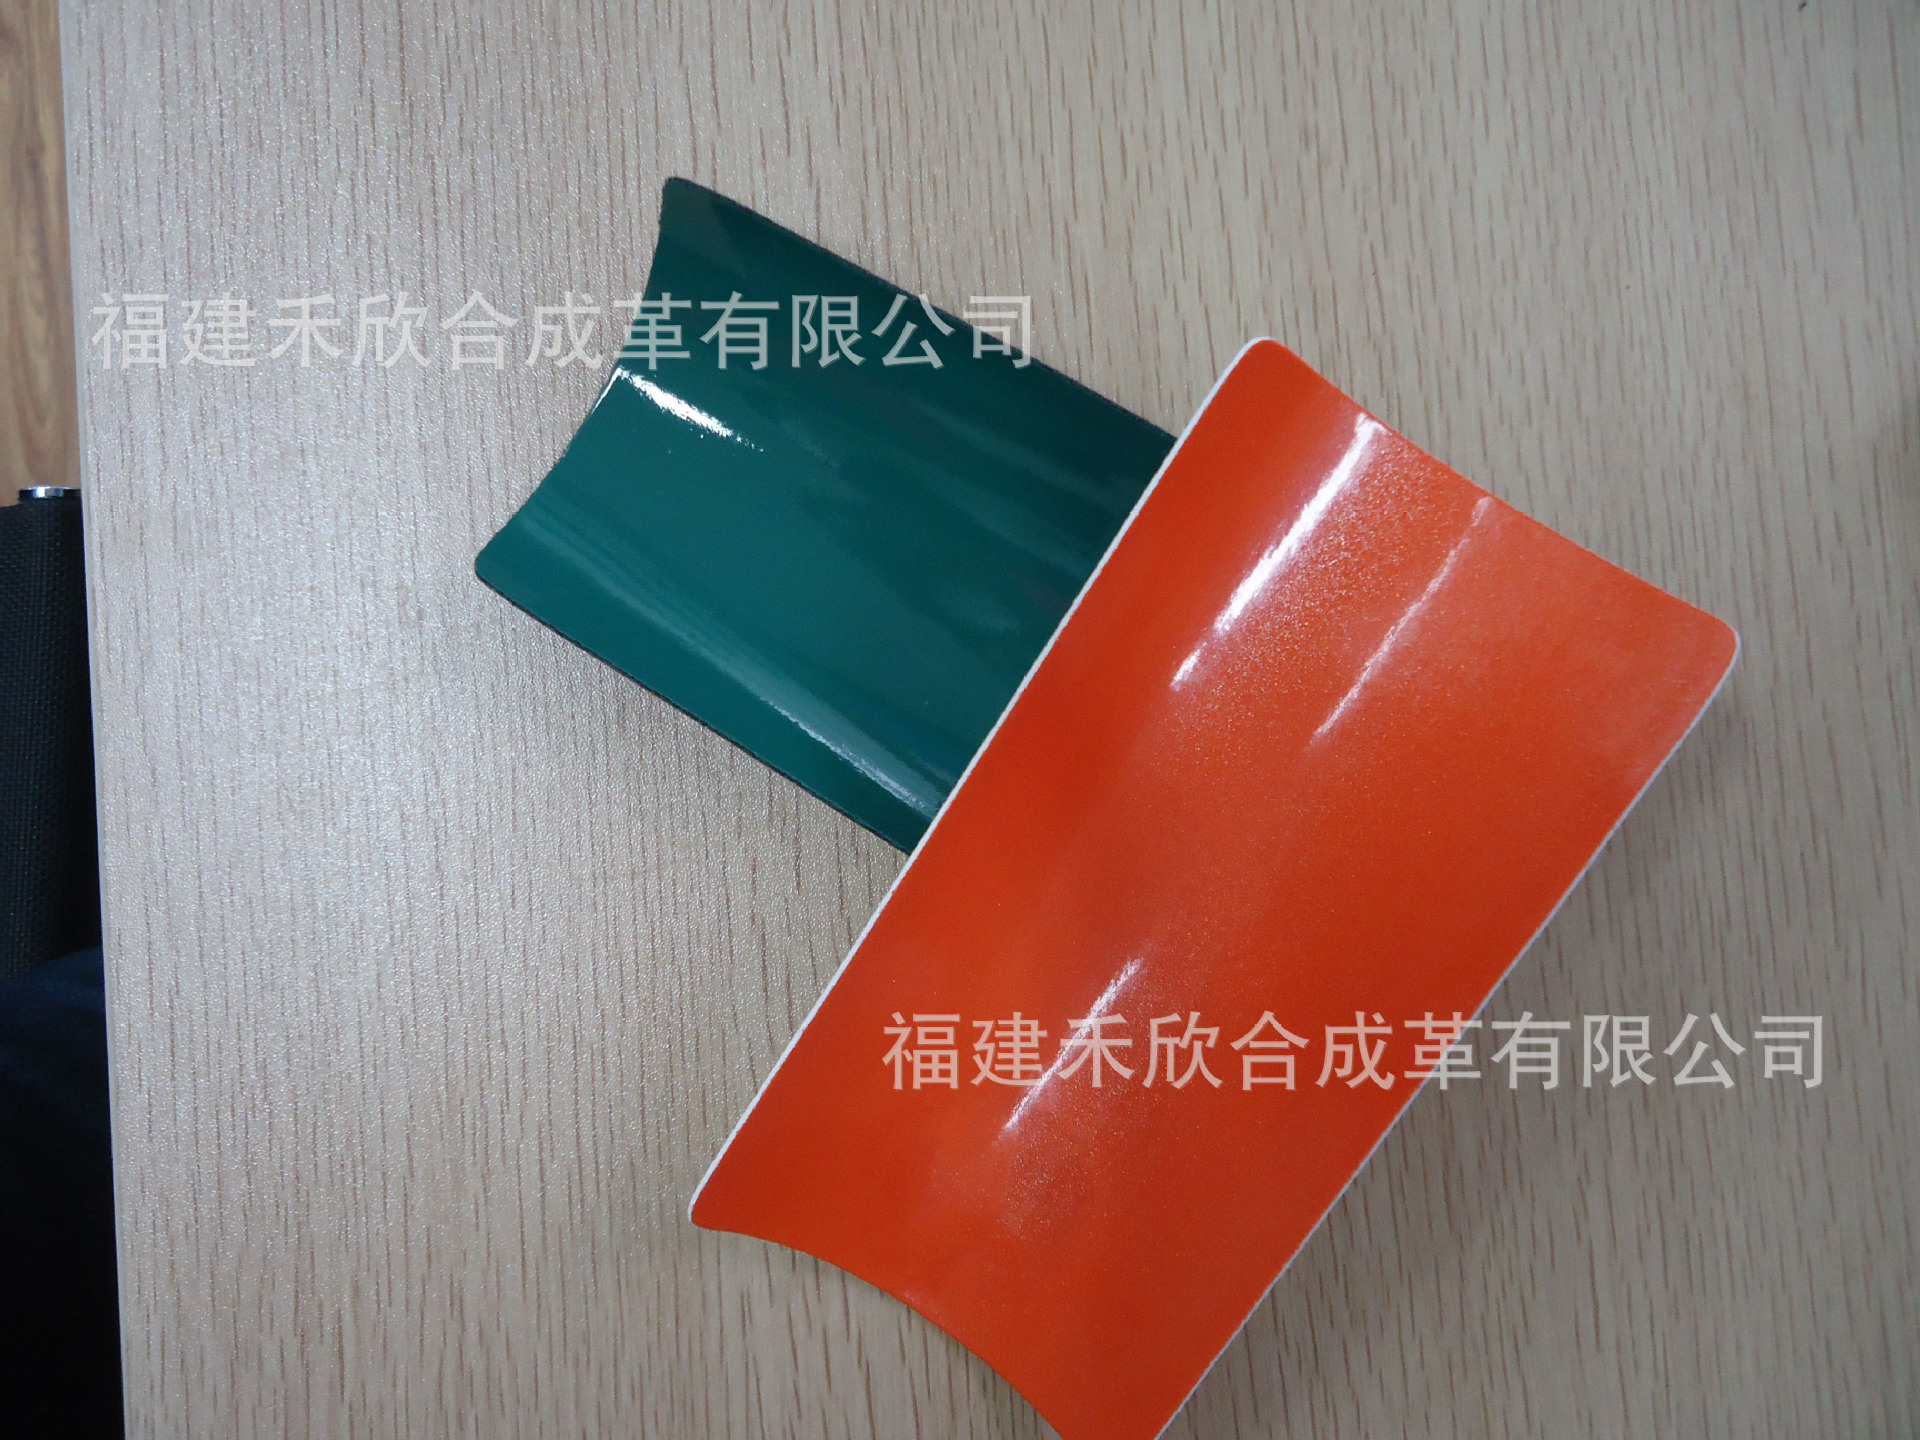 PU Synthetic Leather, Microfiber Leather, Polyurethane Resin, Base Cloth, Toner Surface Additives, Environmental Water Treatment